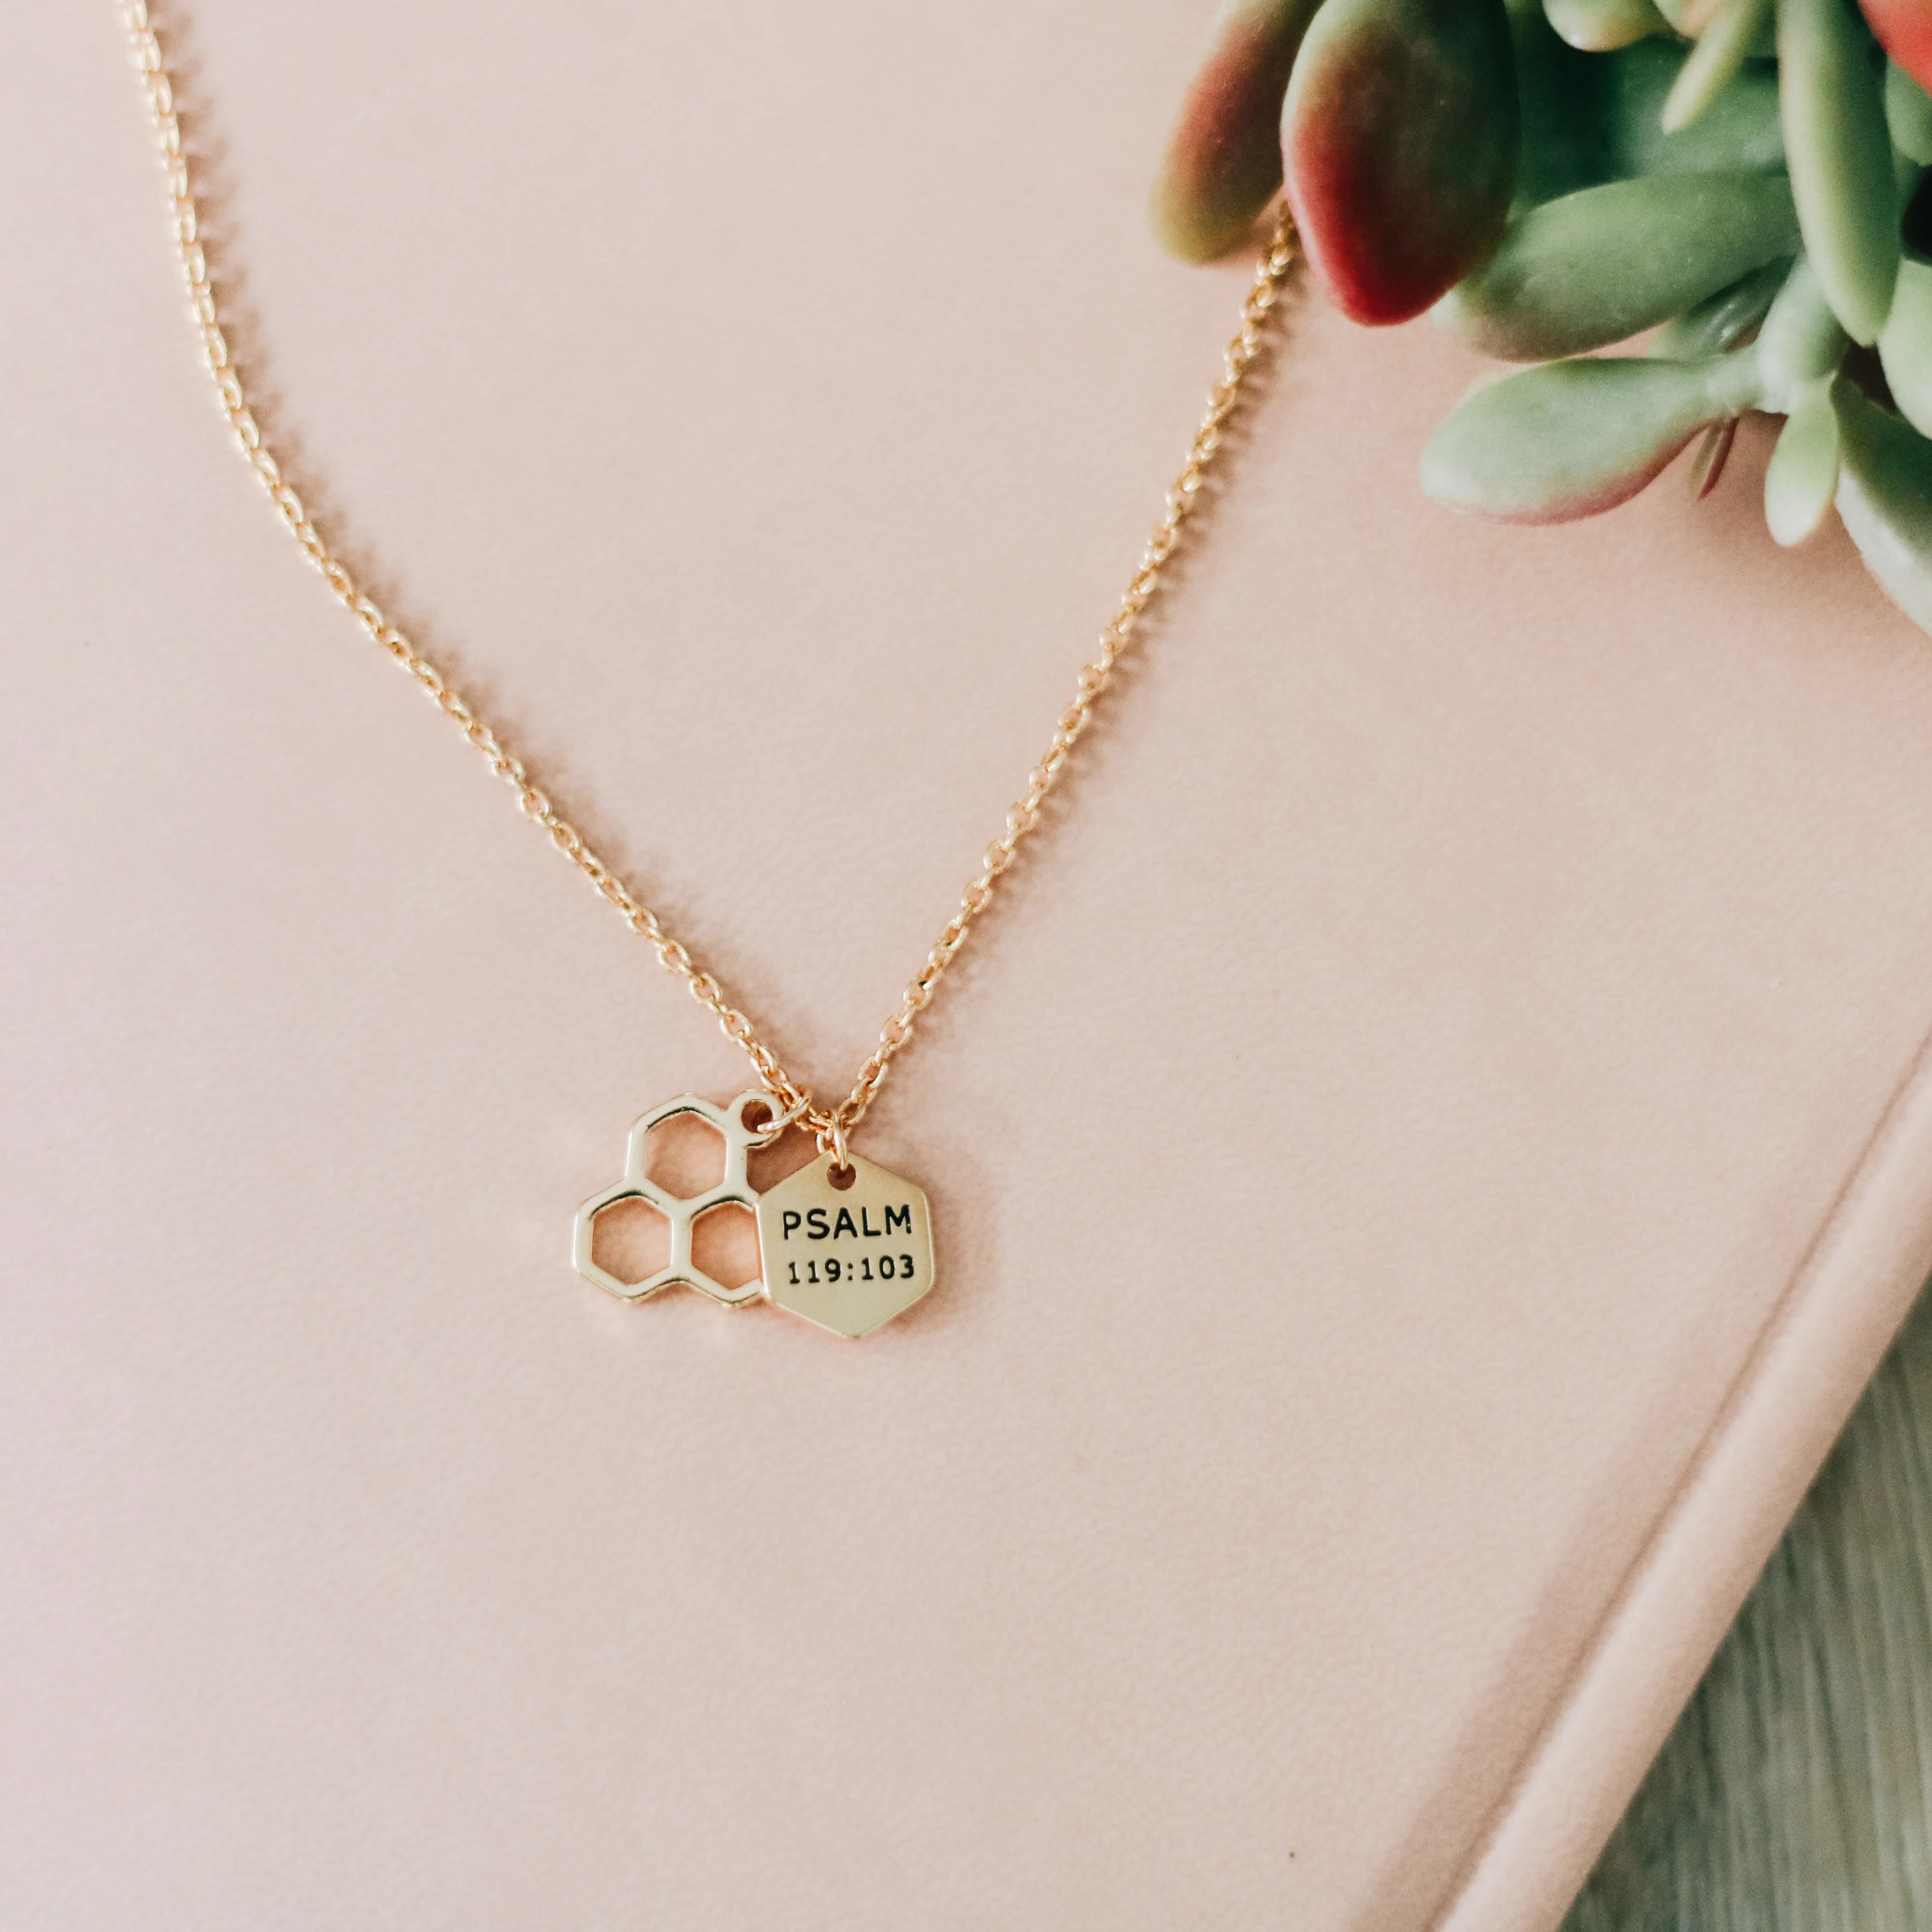 Psalm 119:103 Honeycomb Necklace | The Daily Grace Co.